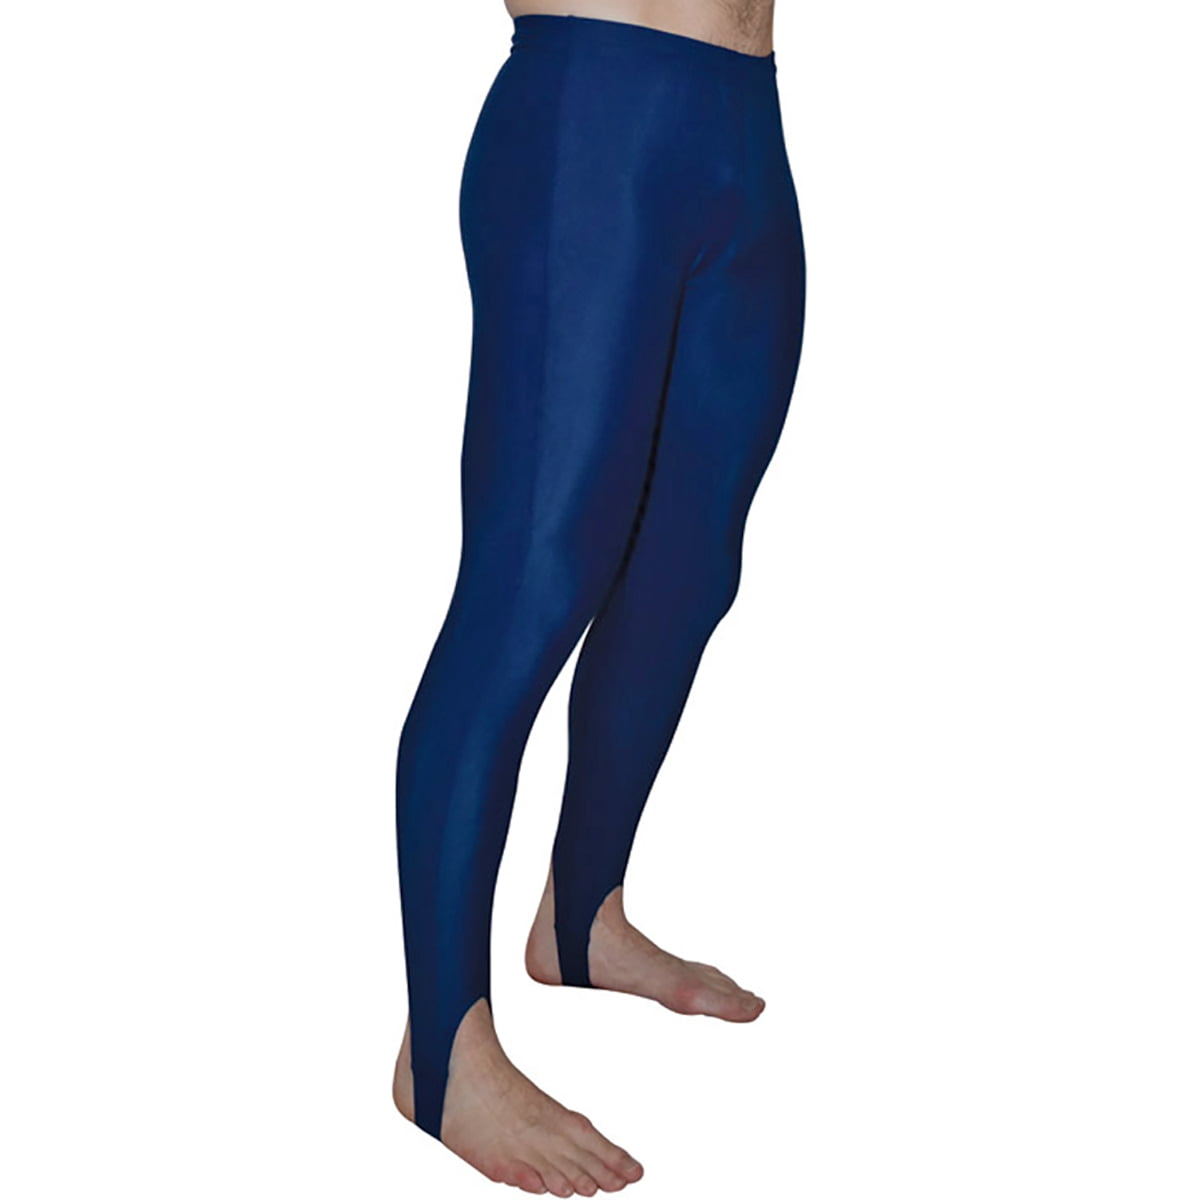 Cliff Keen The Force Compression Gear Wrestling Tights - Small - Navy